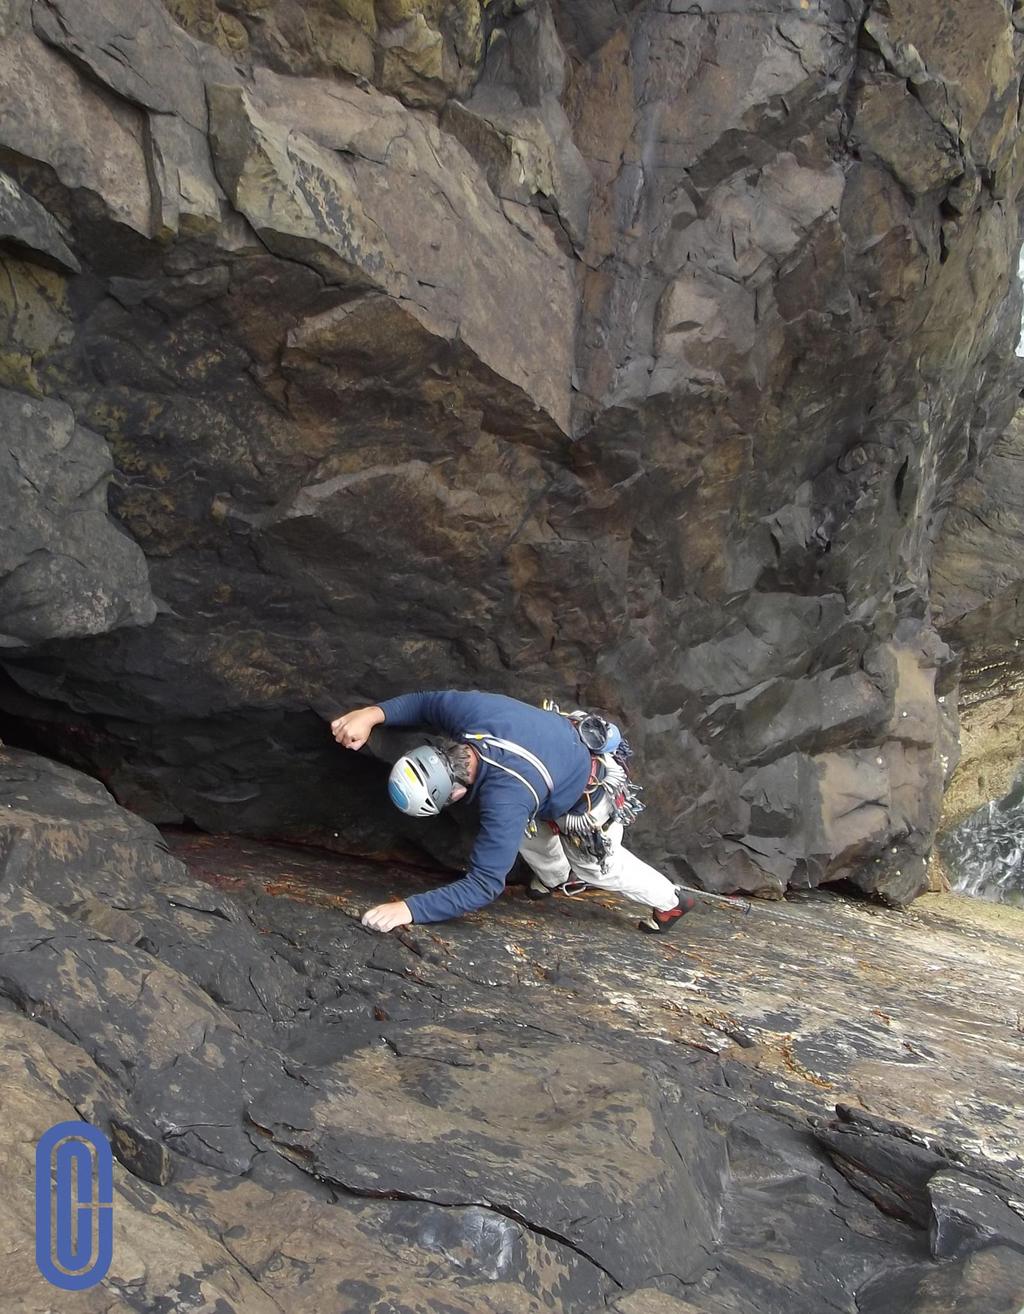 Dave Williams making an amazing journey on the first ascent of Beaj Iskis, HVS 4c Ynys Lochtyn An interim guide Ynys Lochtyn will be fully detailed in the